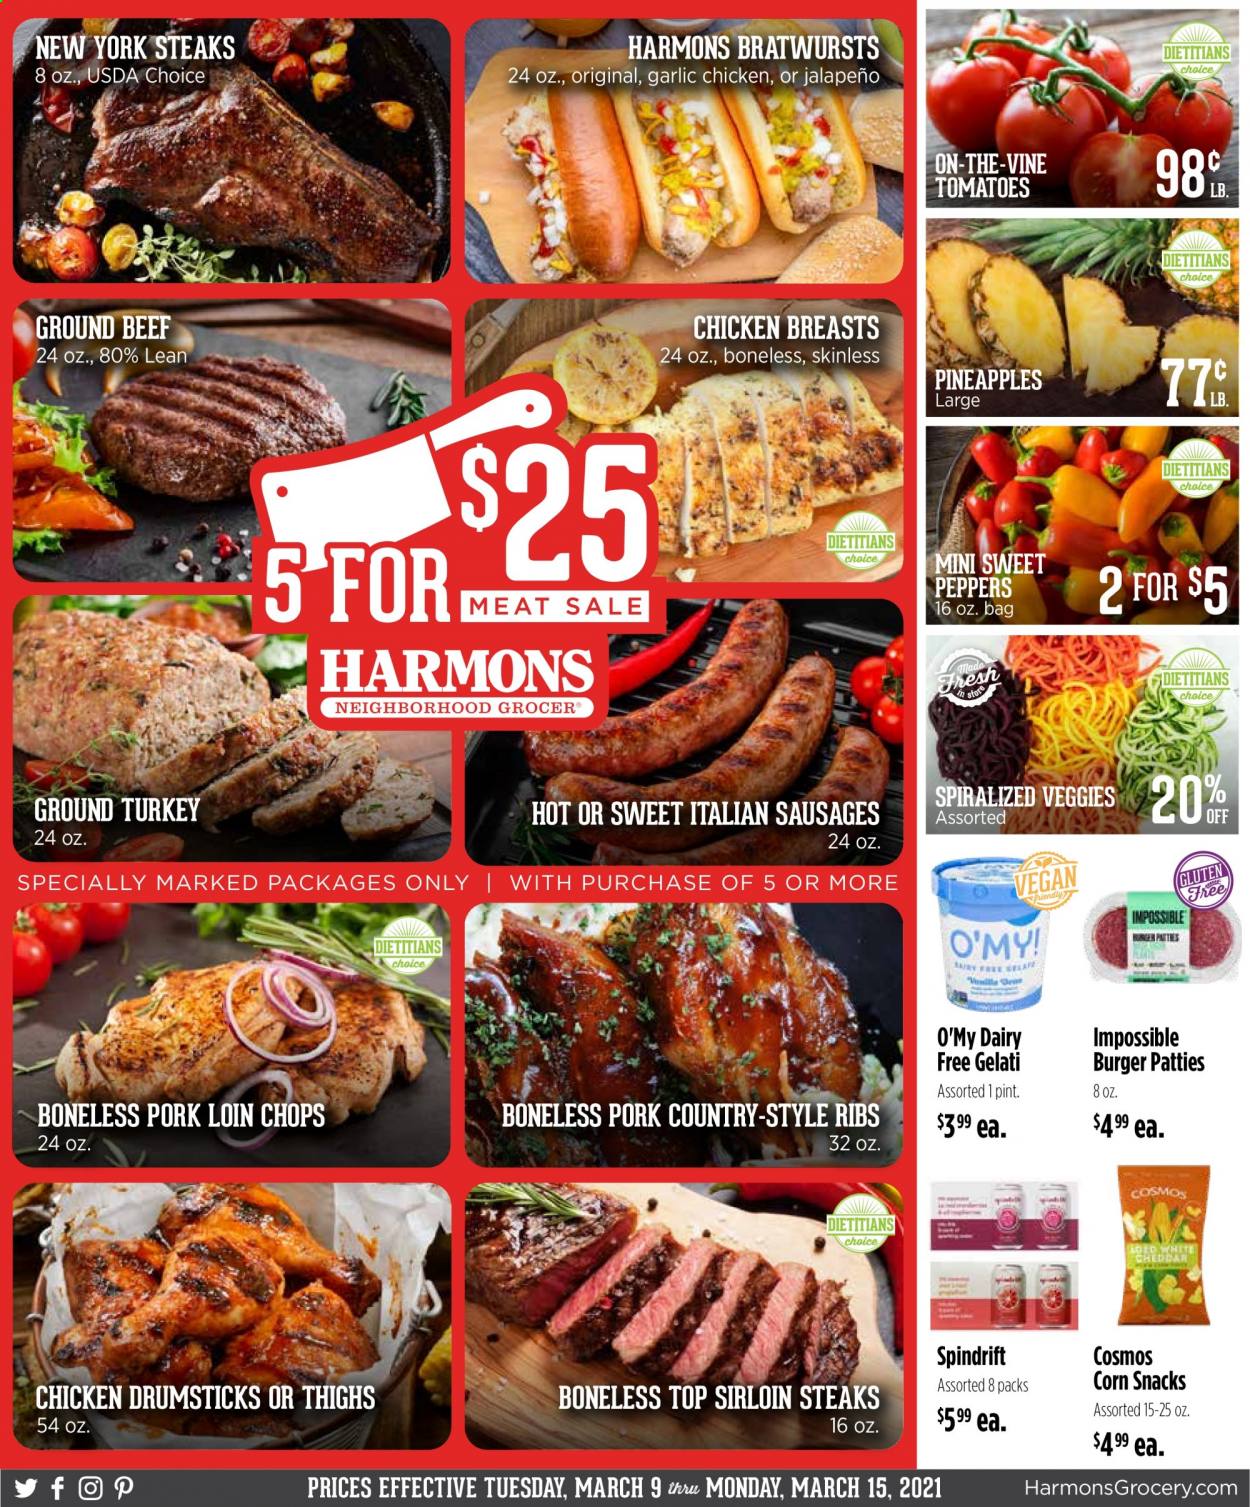 thumbnail - Harmons Flyer - 03/09/2021 - 03/15/2021 - Sales products - sweet peppers, hamburger, sausage, corn, snack, garlic, jalapeño, Spindrift, ground turkey, chicken breasts, chicken drumsticks, beef meat, ground beef, steak, sirloin steak, burger patties, pork loin, pork meat, country style ribs, pineapple. Page 1.